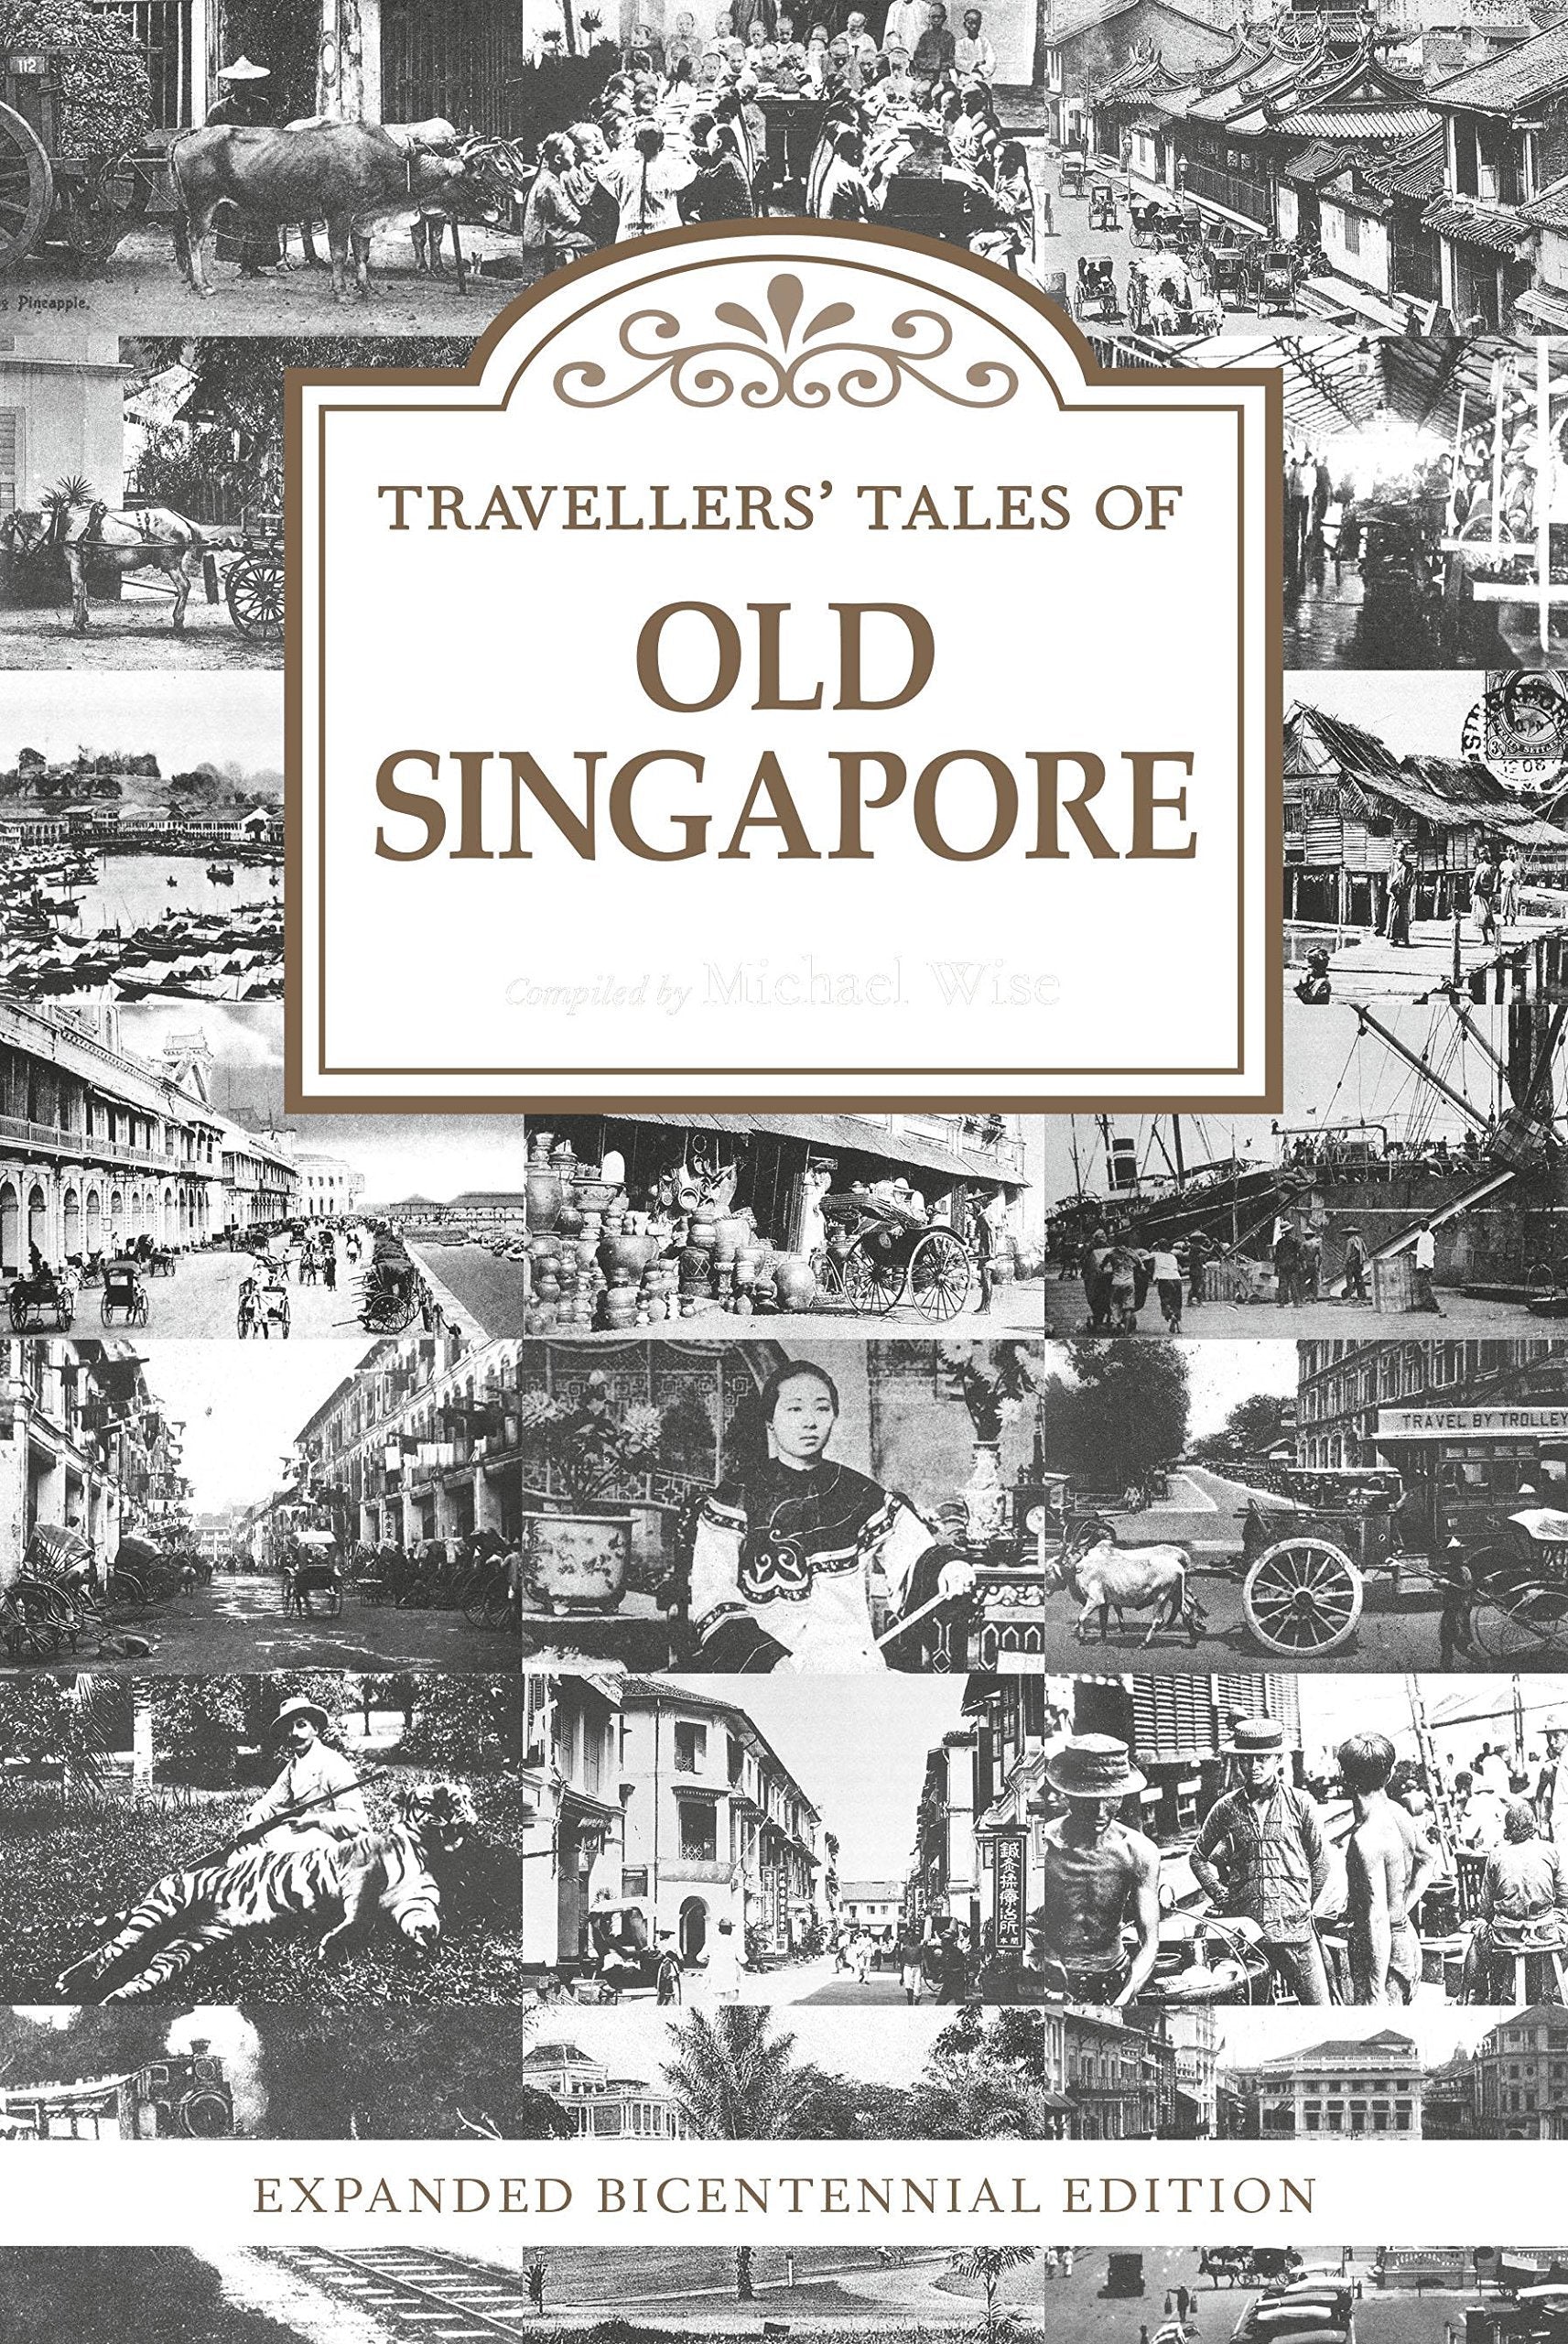 Travellers' Tales of Old Singapore: Expanded Bicentennial Edition